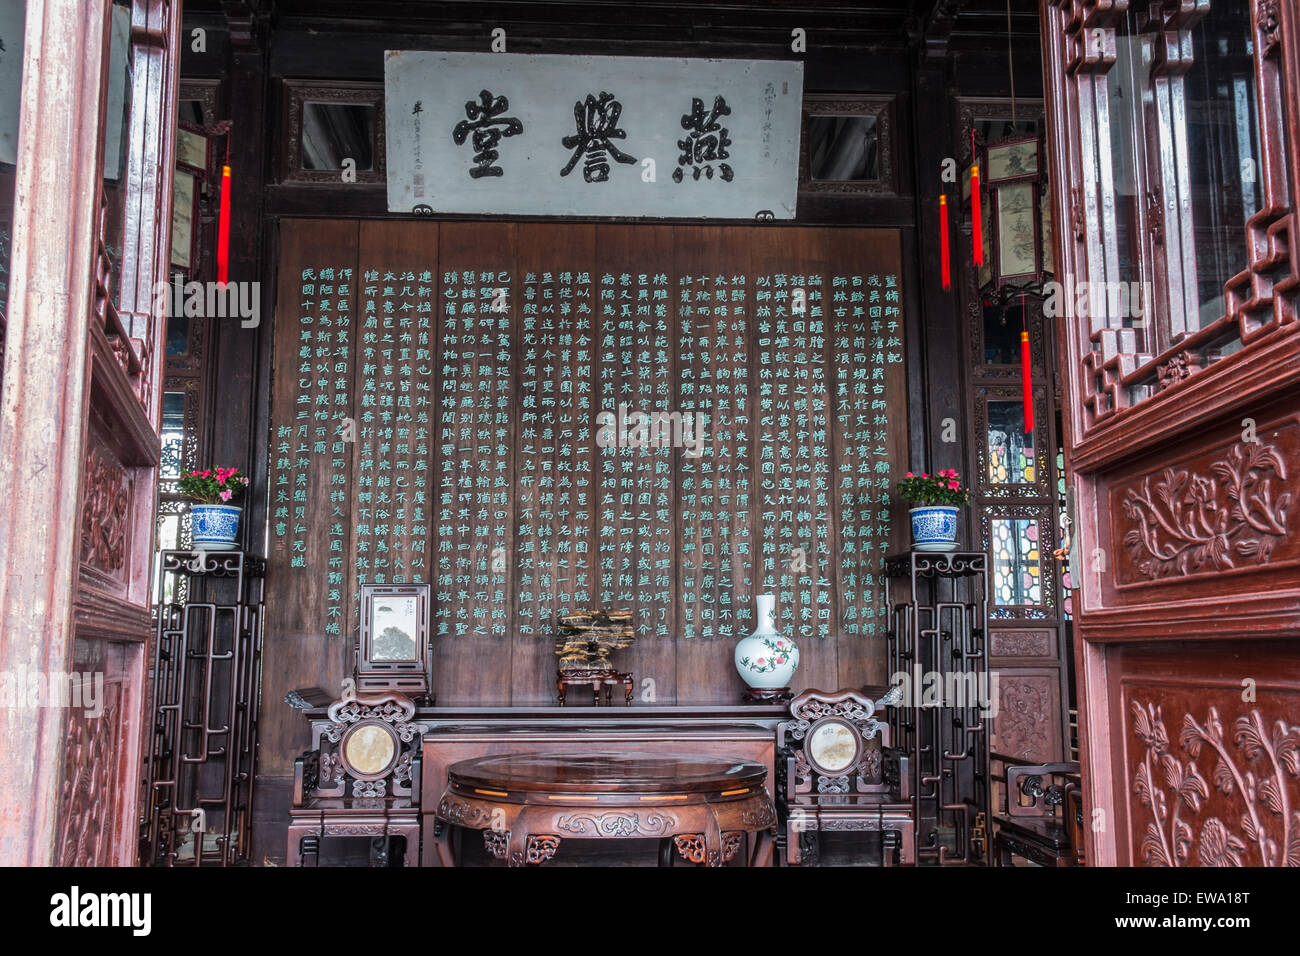 Chinese calligraphy on temple interior Stock Photo